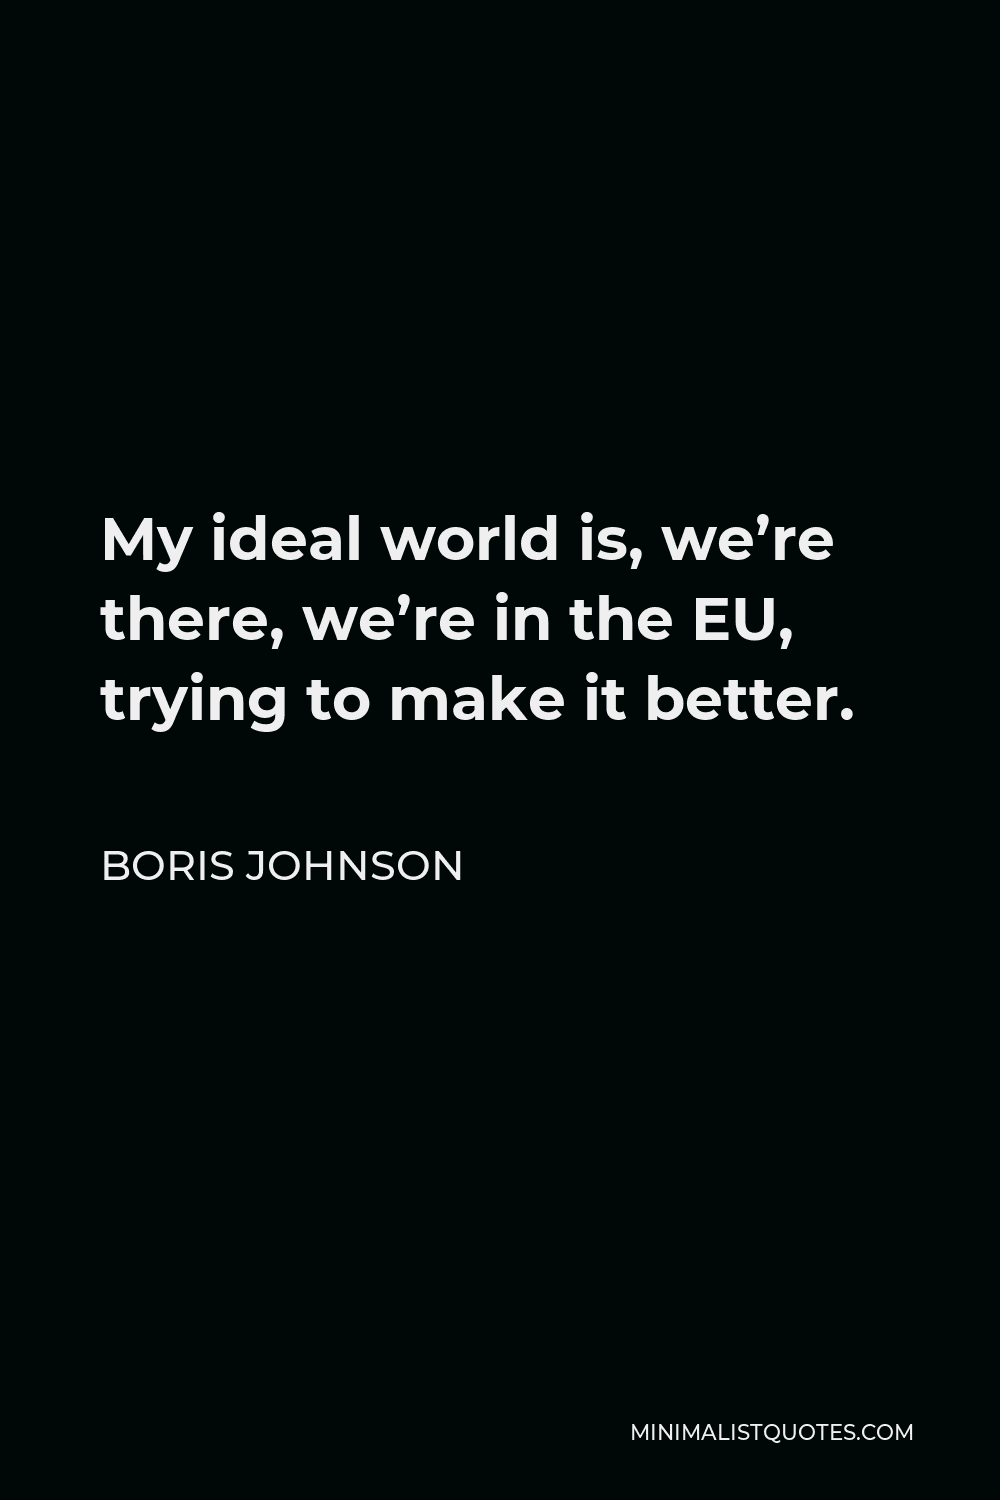 Boris Johnson Quote - My ideal world is, we’re there, we’re in the EU, trying to make it better.